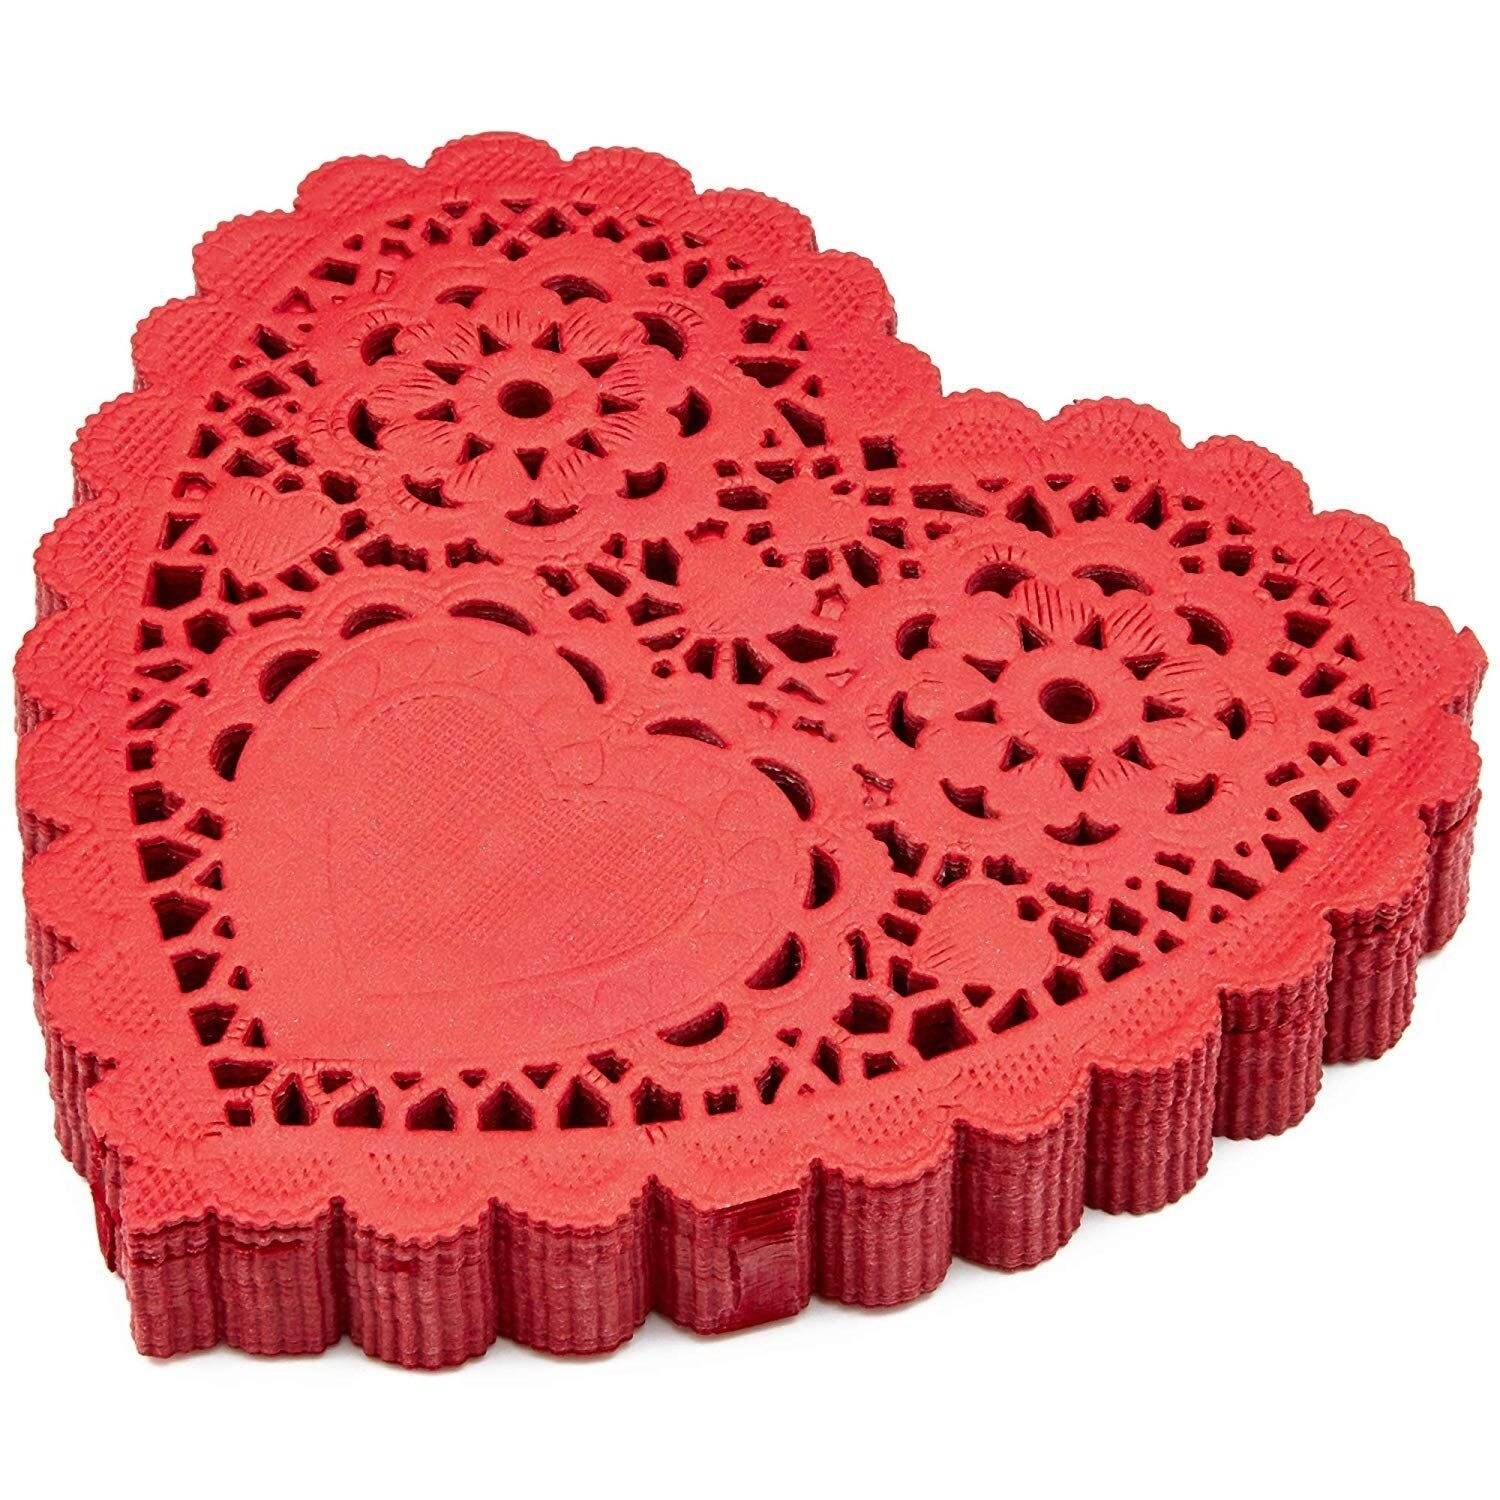 200 Piece Red Disposable Heart Shape 4 inch Paper Doilies Lace for Art & Craft Valentines Parties Pastry Decorations, 4 Inches